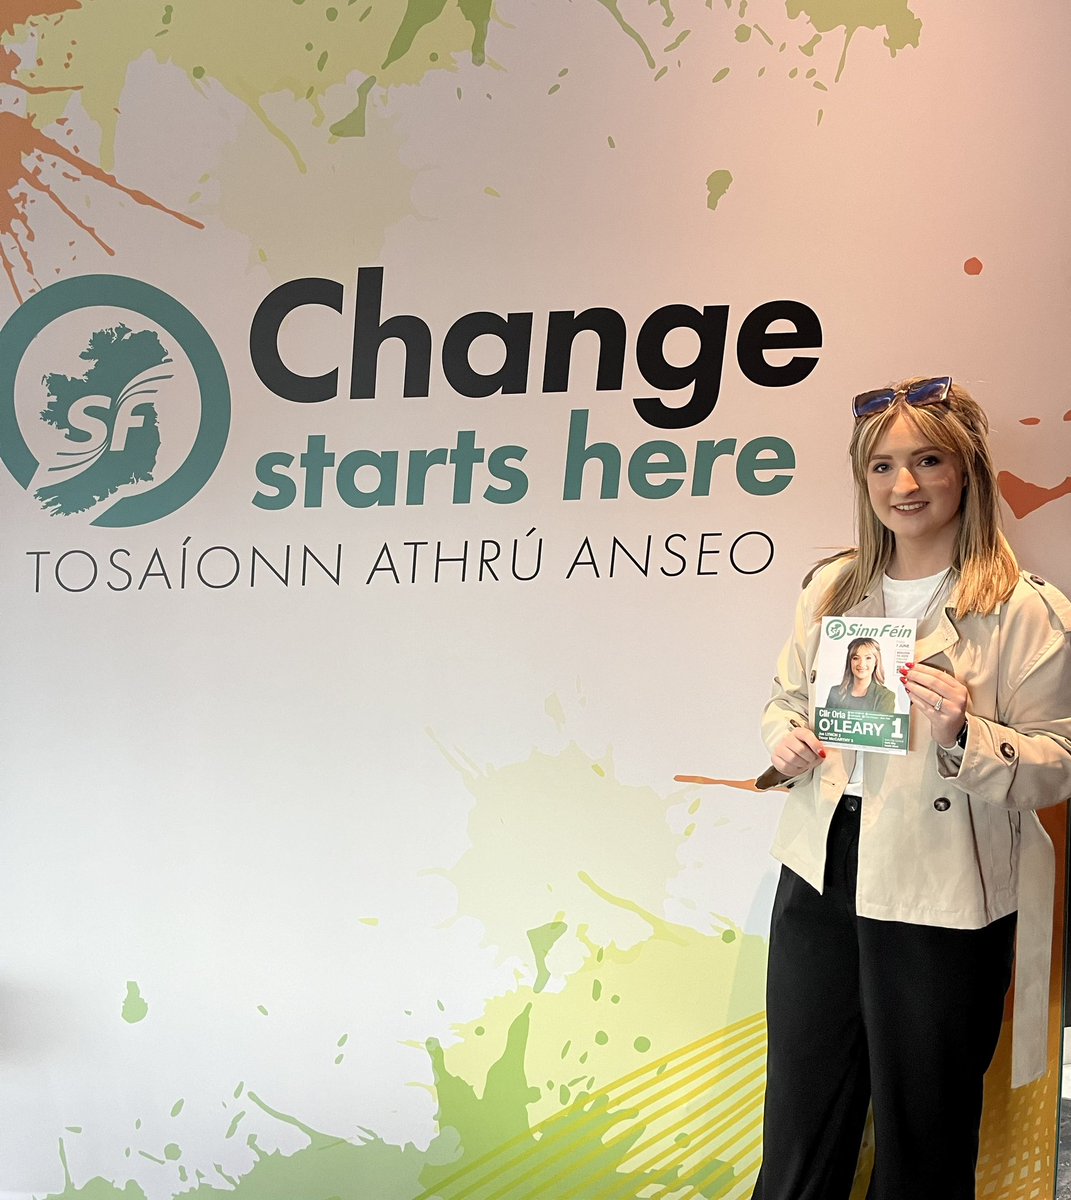 All set for the National launch of Sinn Féin Local and European election candidates. #ChangeStartsHere ✊🏼 #LE24